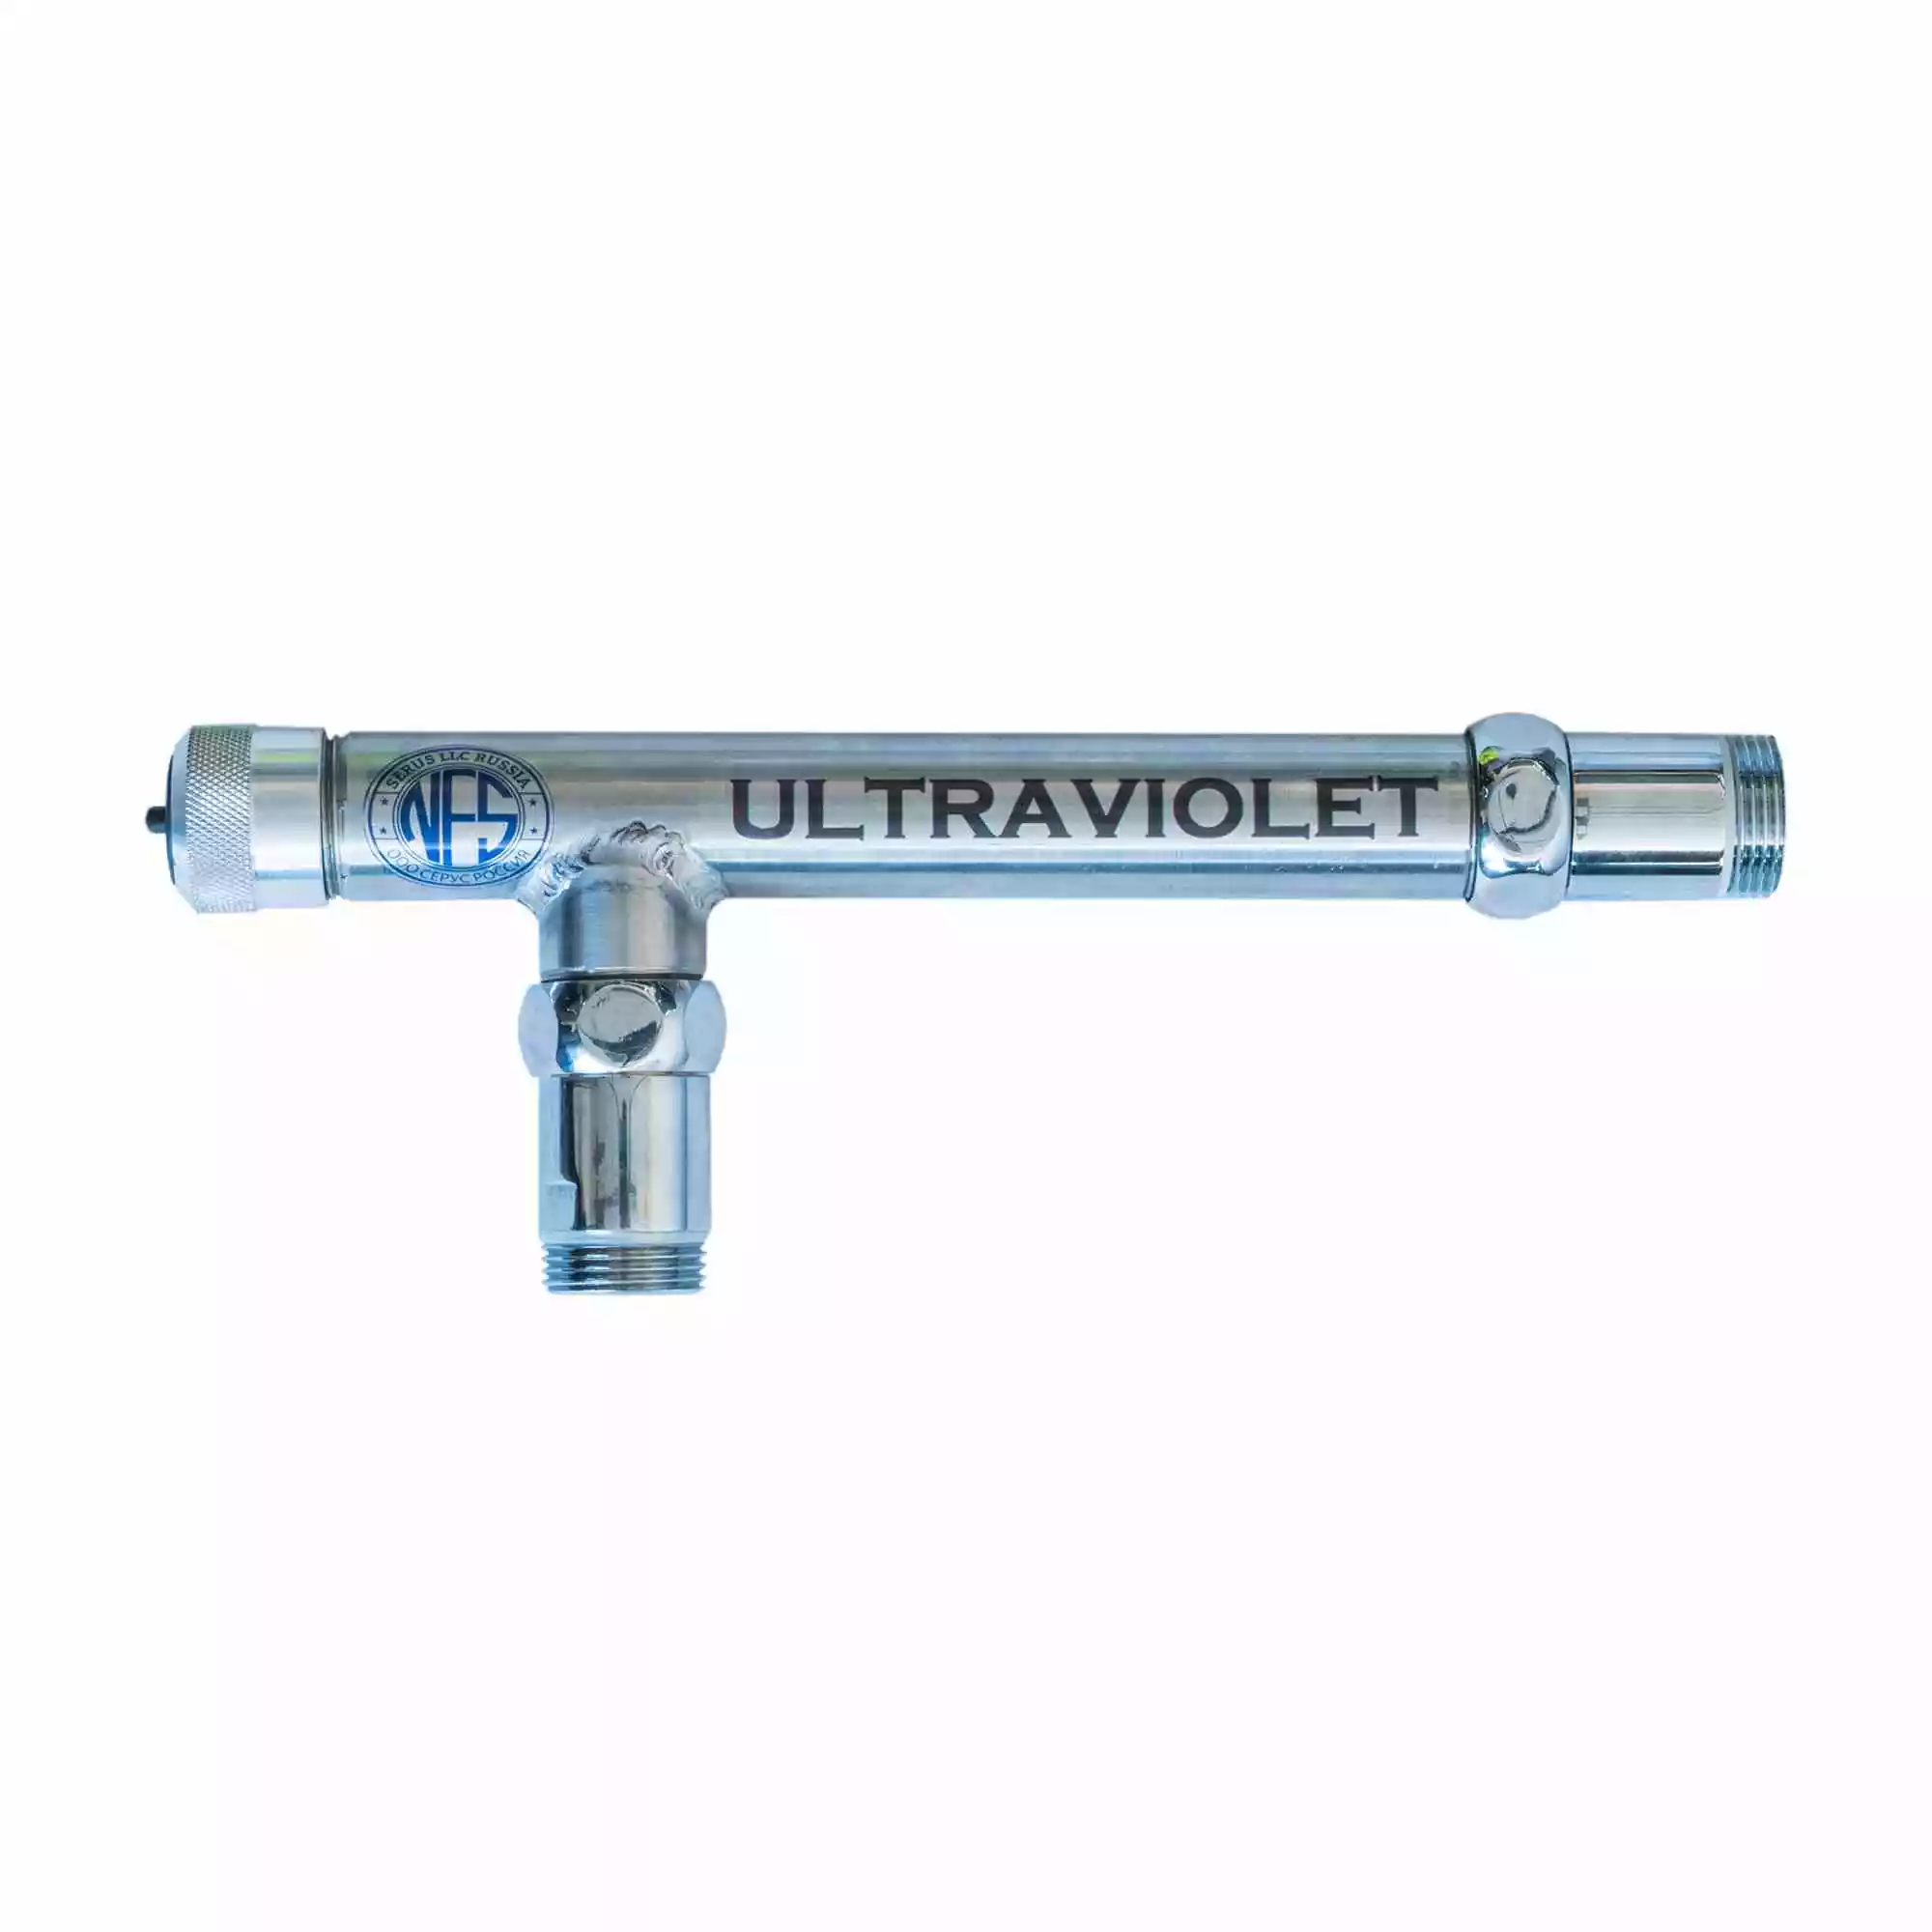 Ultraviolet Water Disinfection Sterilizer UV-1A